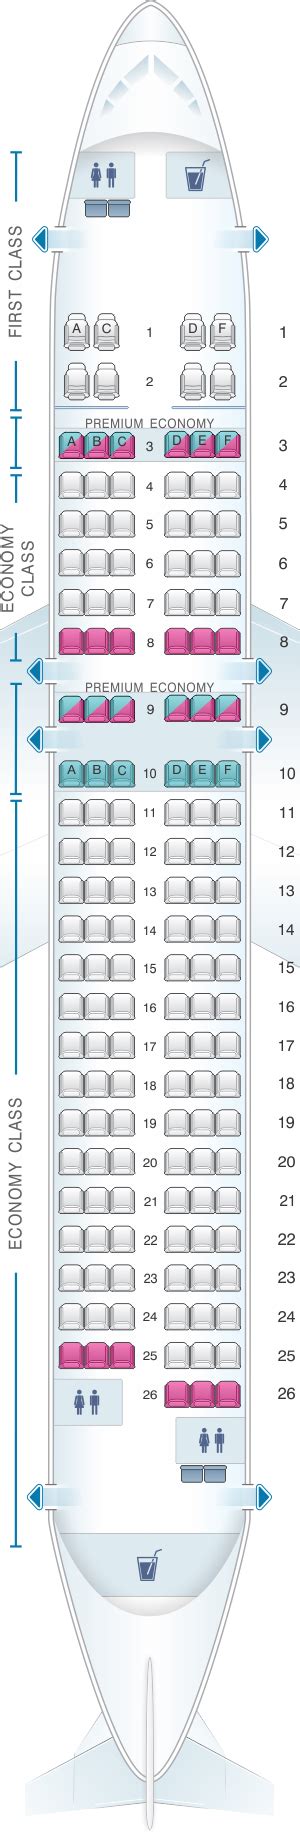 Alaska Airlines Seating Chart Airbus A320 Awesome Home